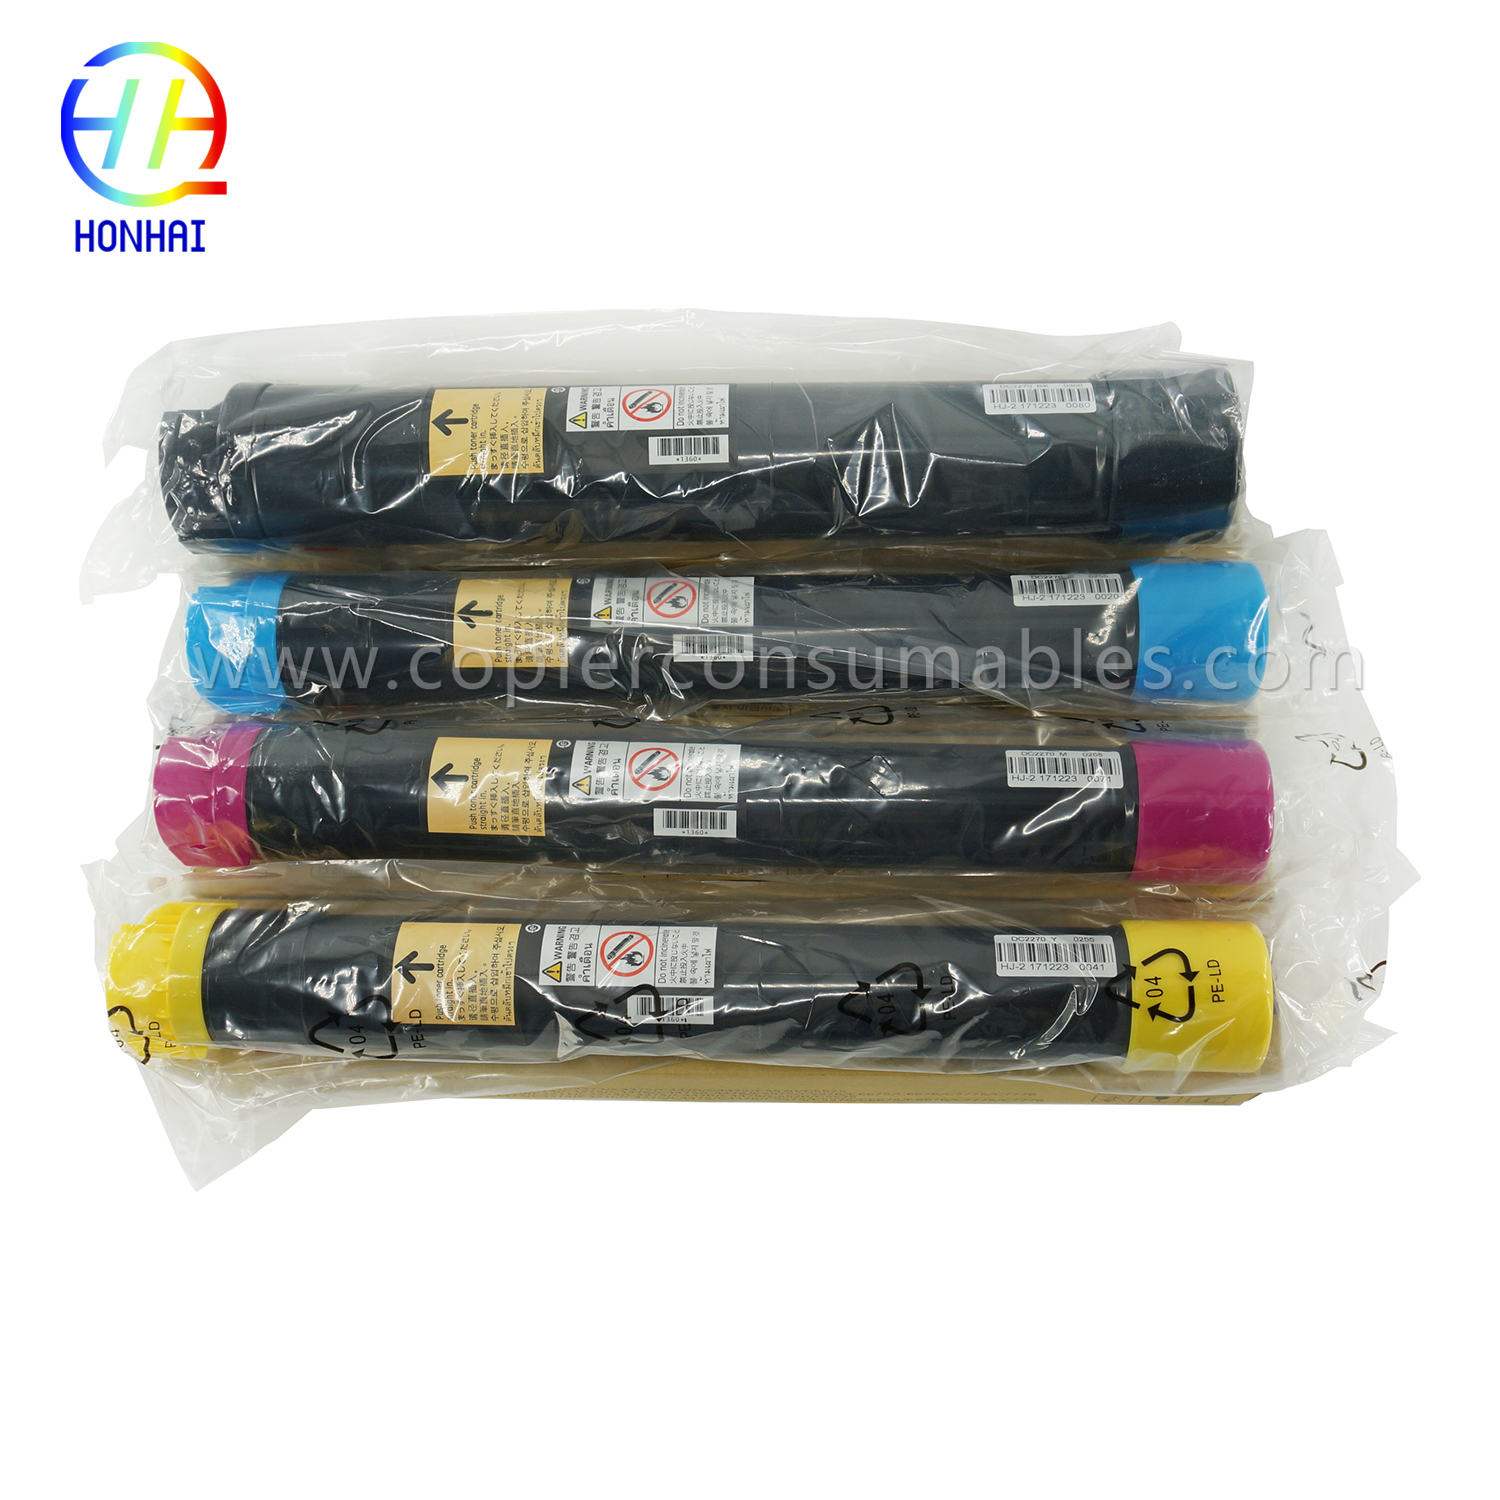 Toner Cartridge for Xerox Docucentre and Apeosport IV C2270 C2275 C3370 C3371 C3373 C3375 C4470 C4475 C5570 C5575 C2275 C3373 C4475 C5575 C6675 C7775